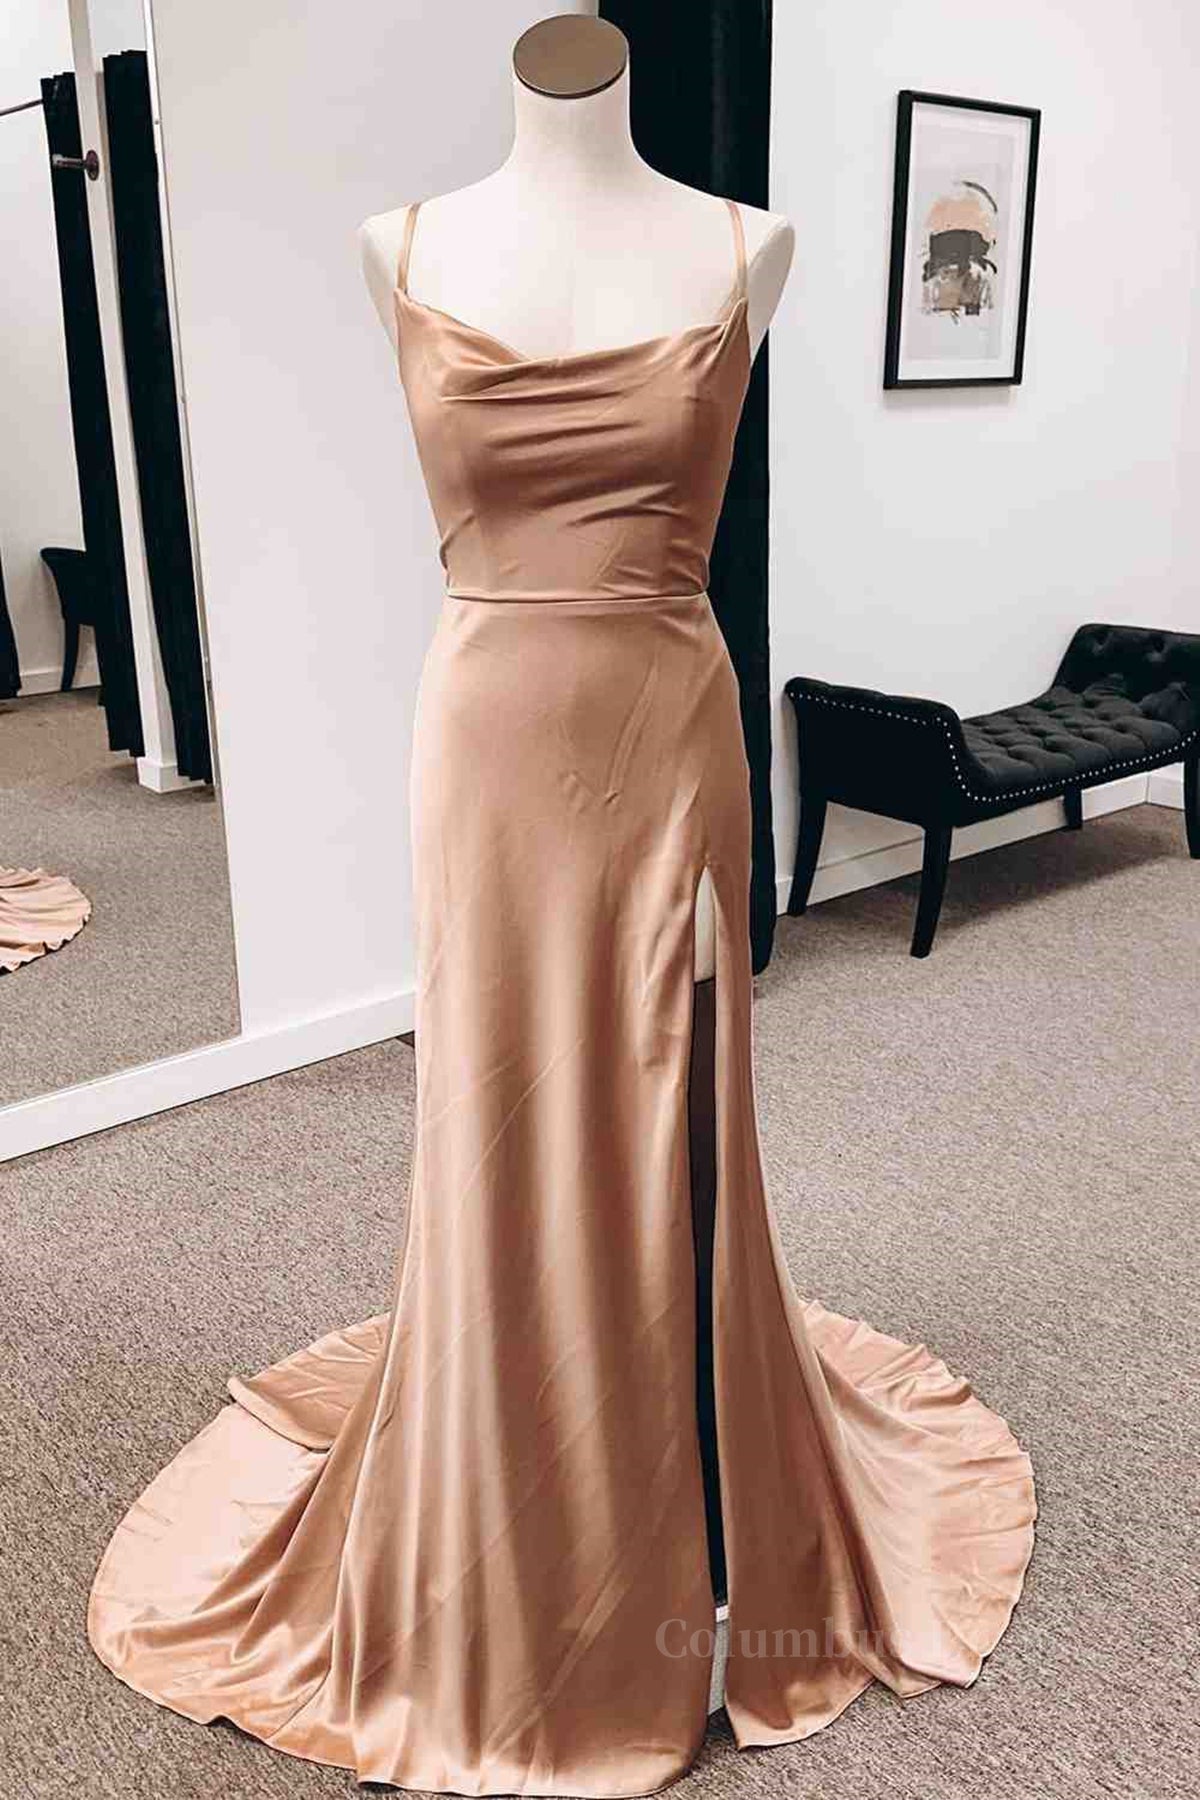 Backless Champagne Long Corset Prom Dress with High Slit, Long Champagne Corset Formal Graduation Evening Dress outfit, Bridesmaid Dresses Black